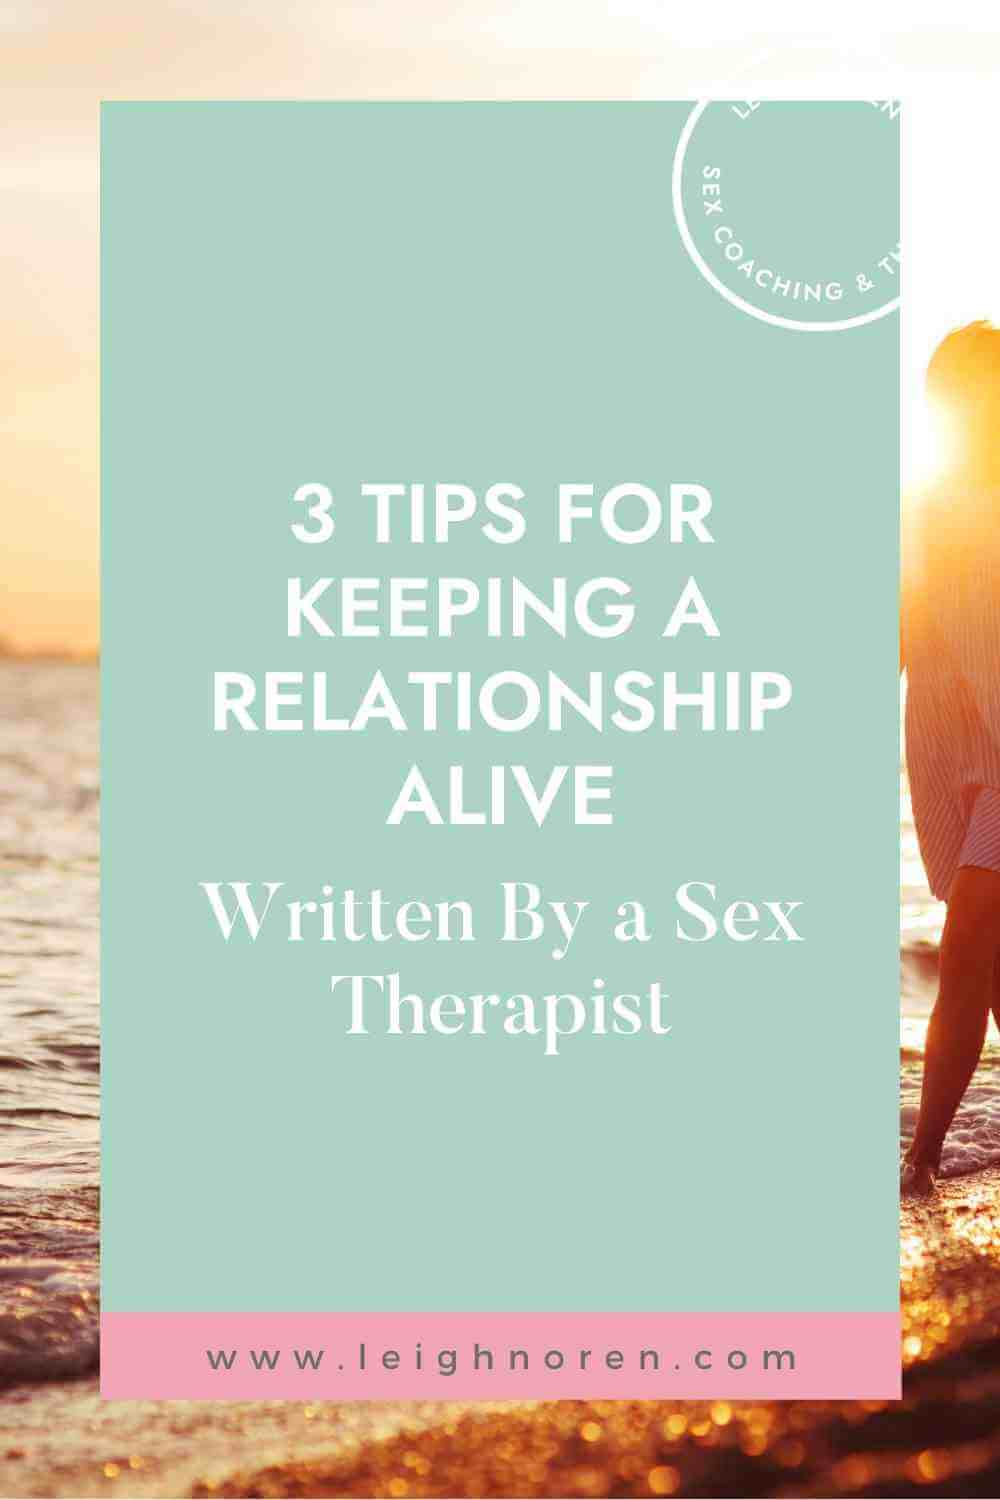 3 Tips for Keeping a Relationship Alive - By a Sex Therapist